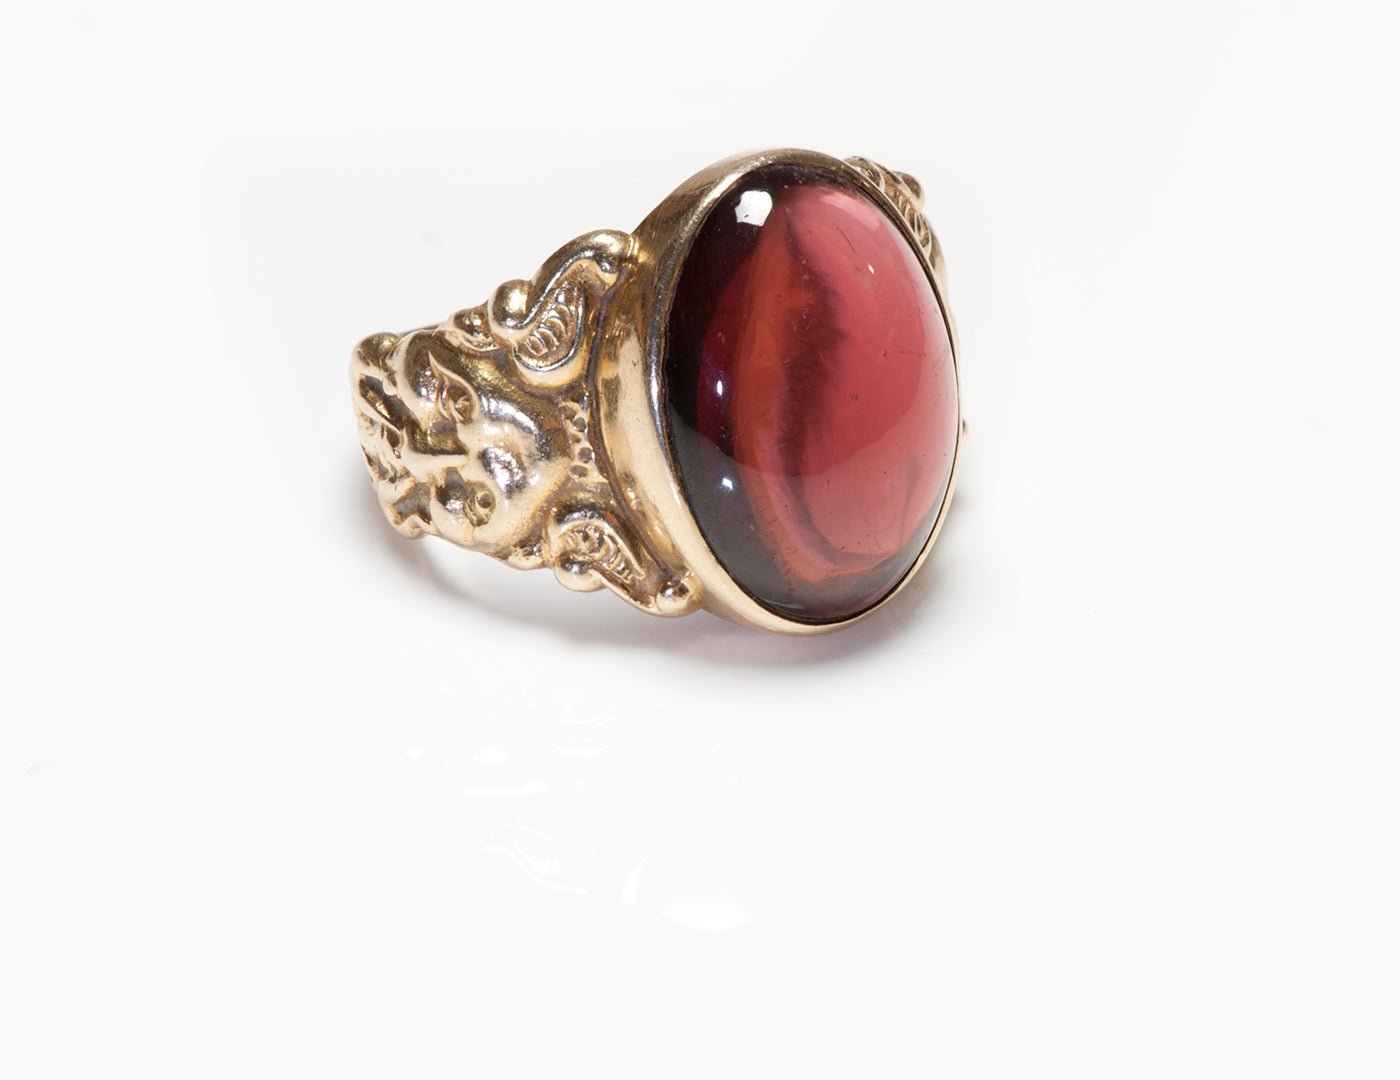 Antique Turn of the Century Gold and Cabochon Garnet Men's Ring - DSF Antique Jewelry